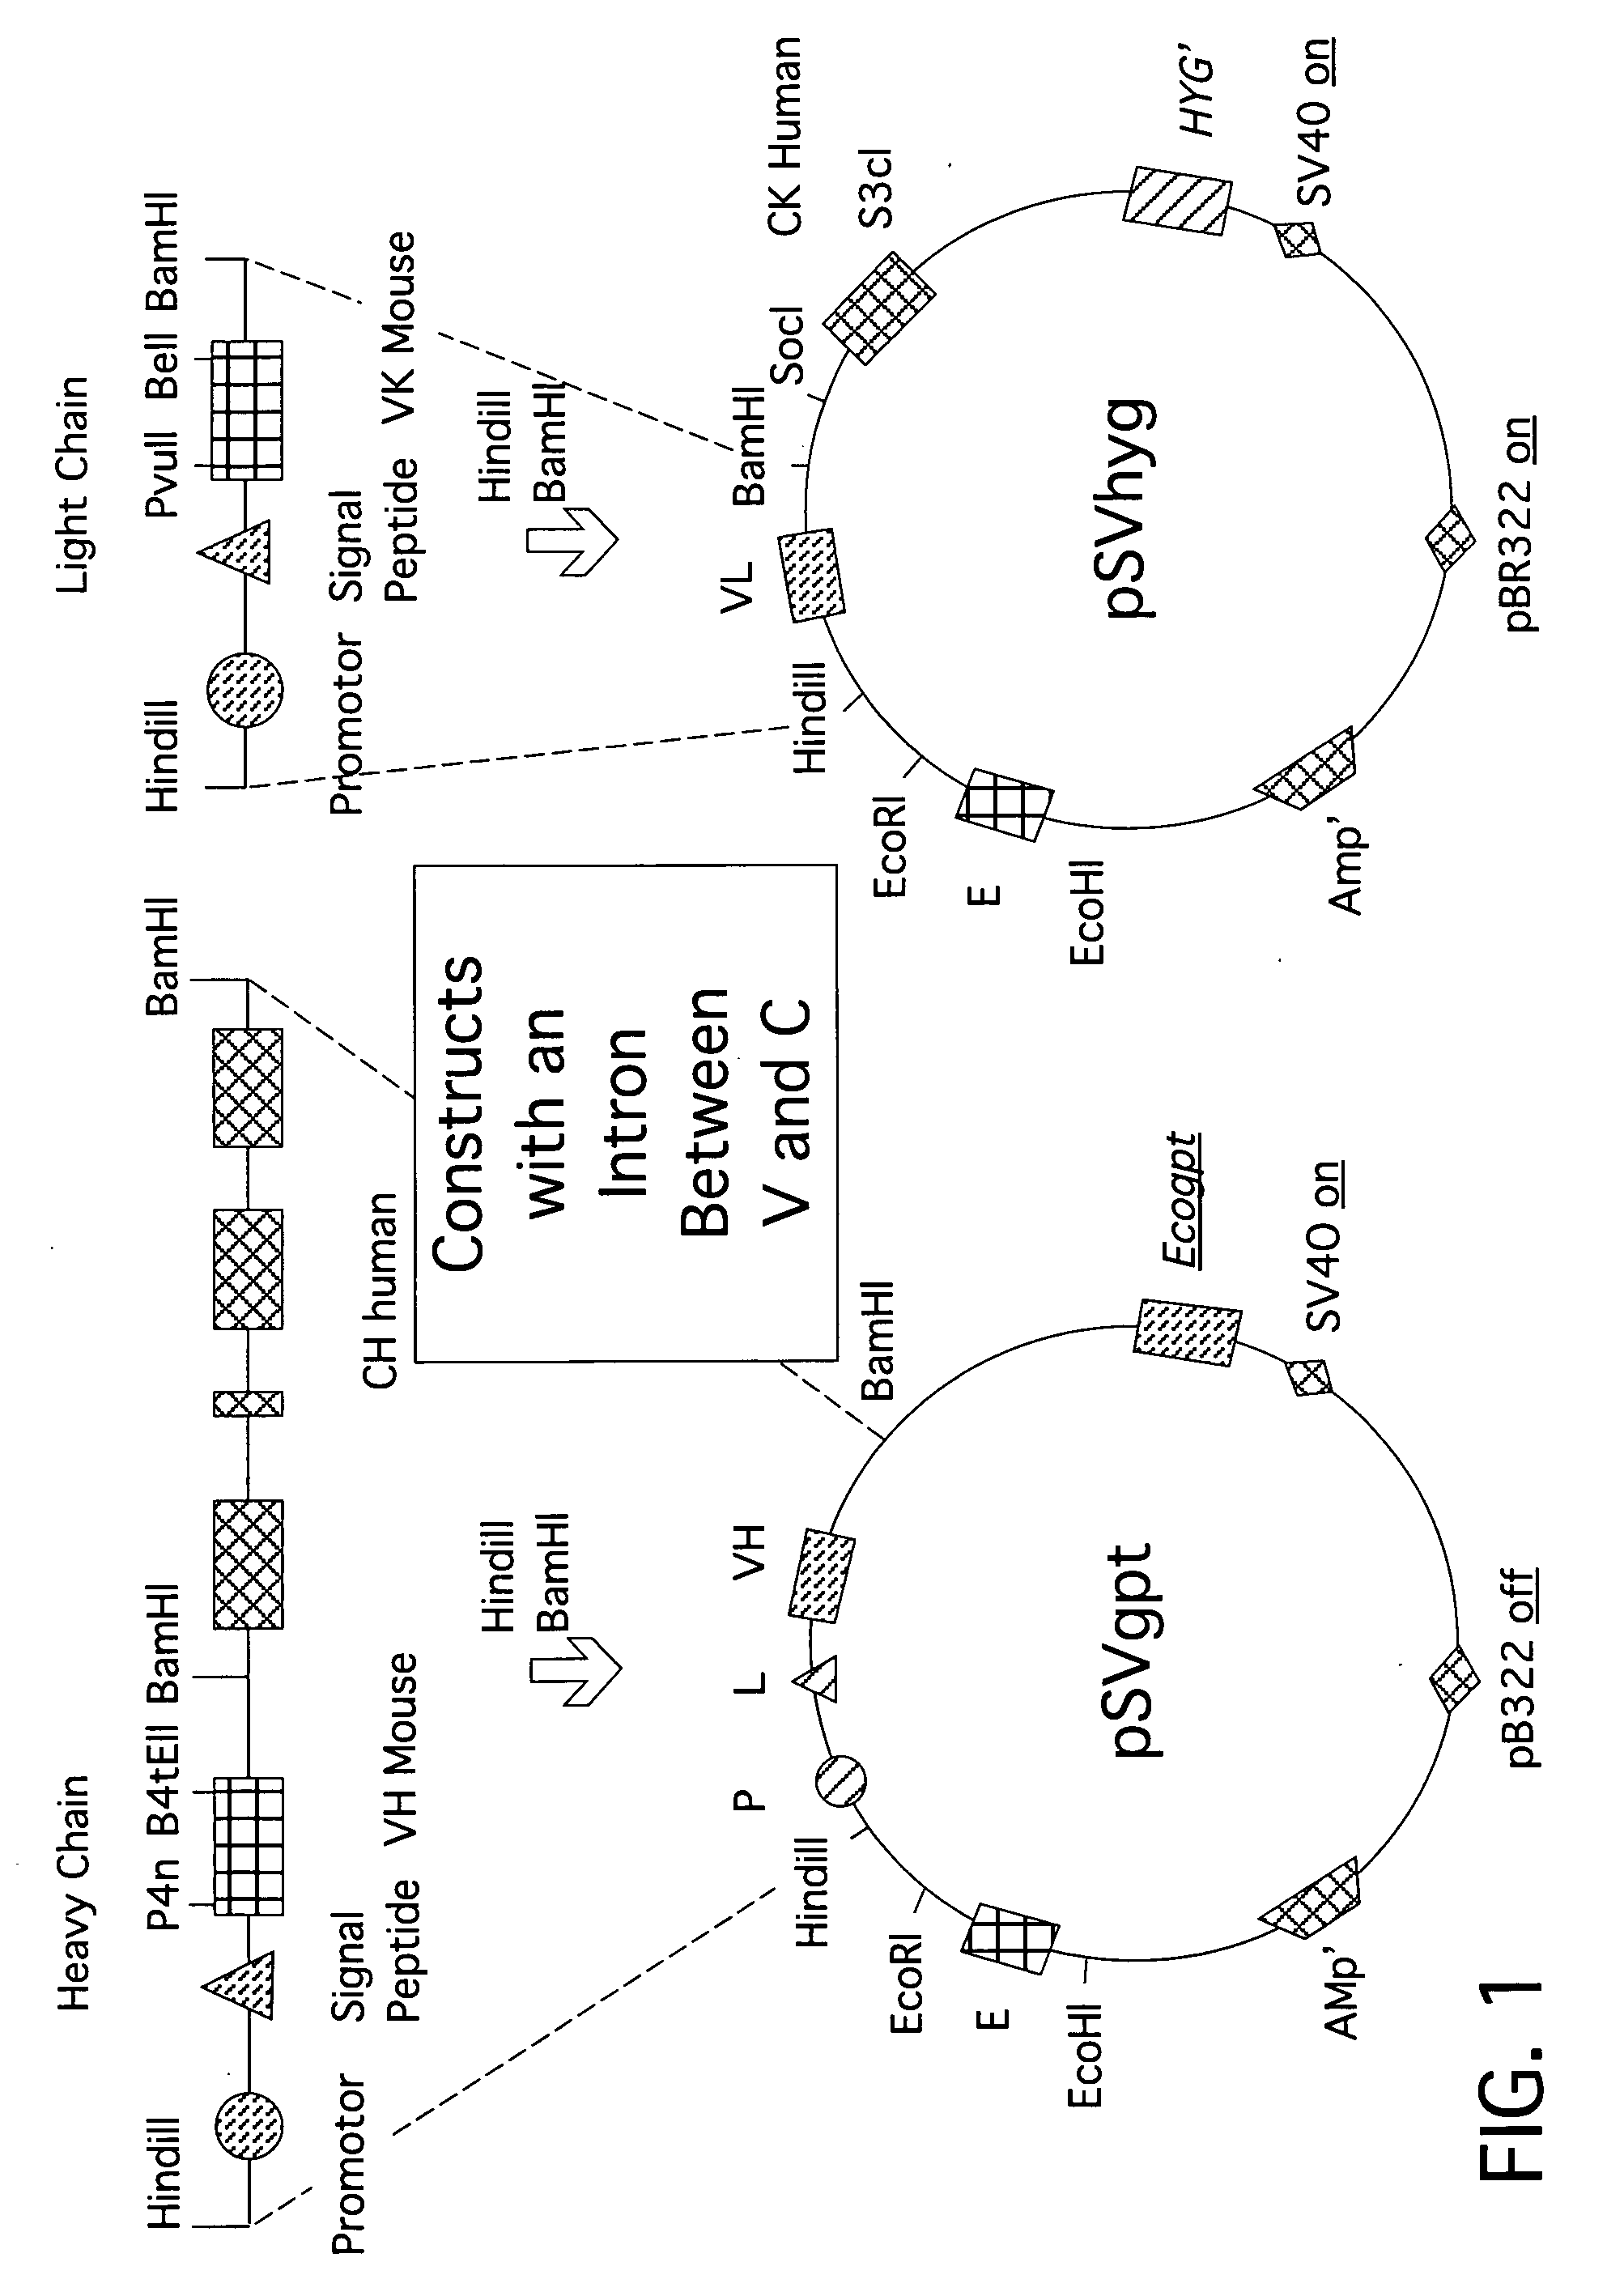 Recombinant DNA-molecule complex for the expression of anti-human-interferon-gamma chimeric antibodies or antibody fragments